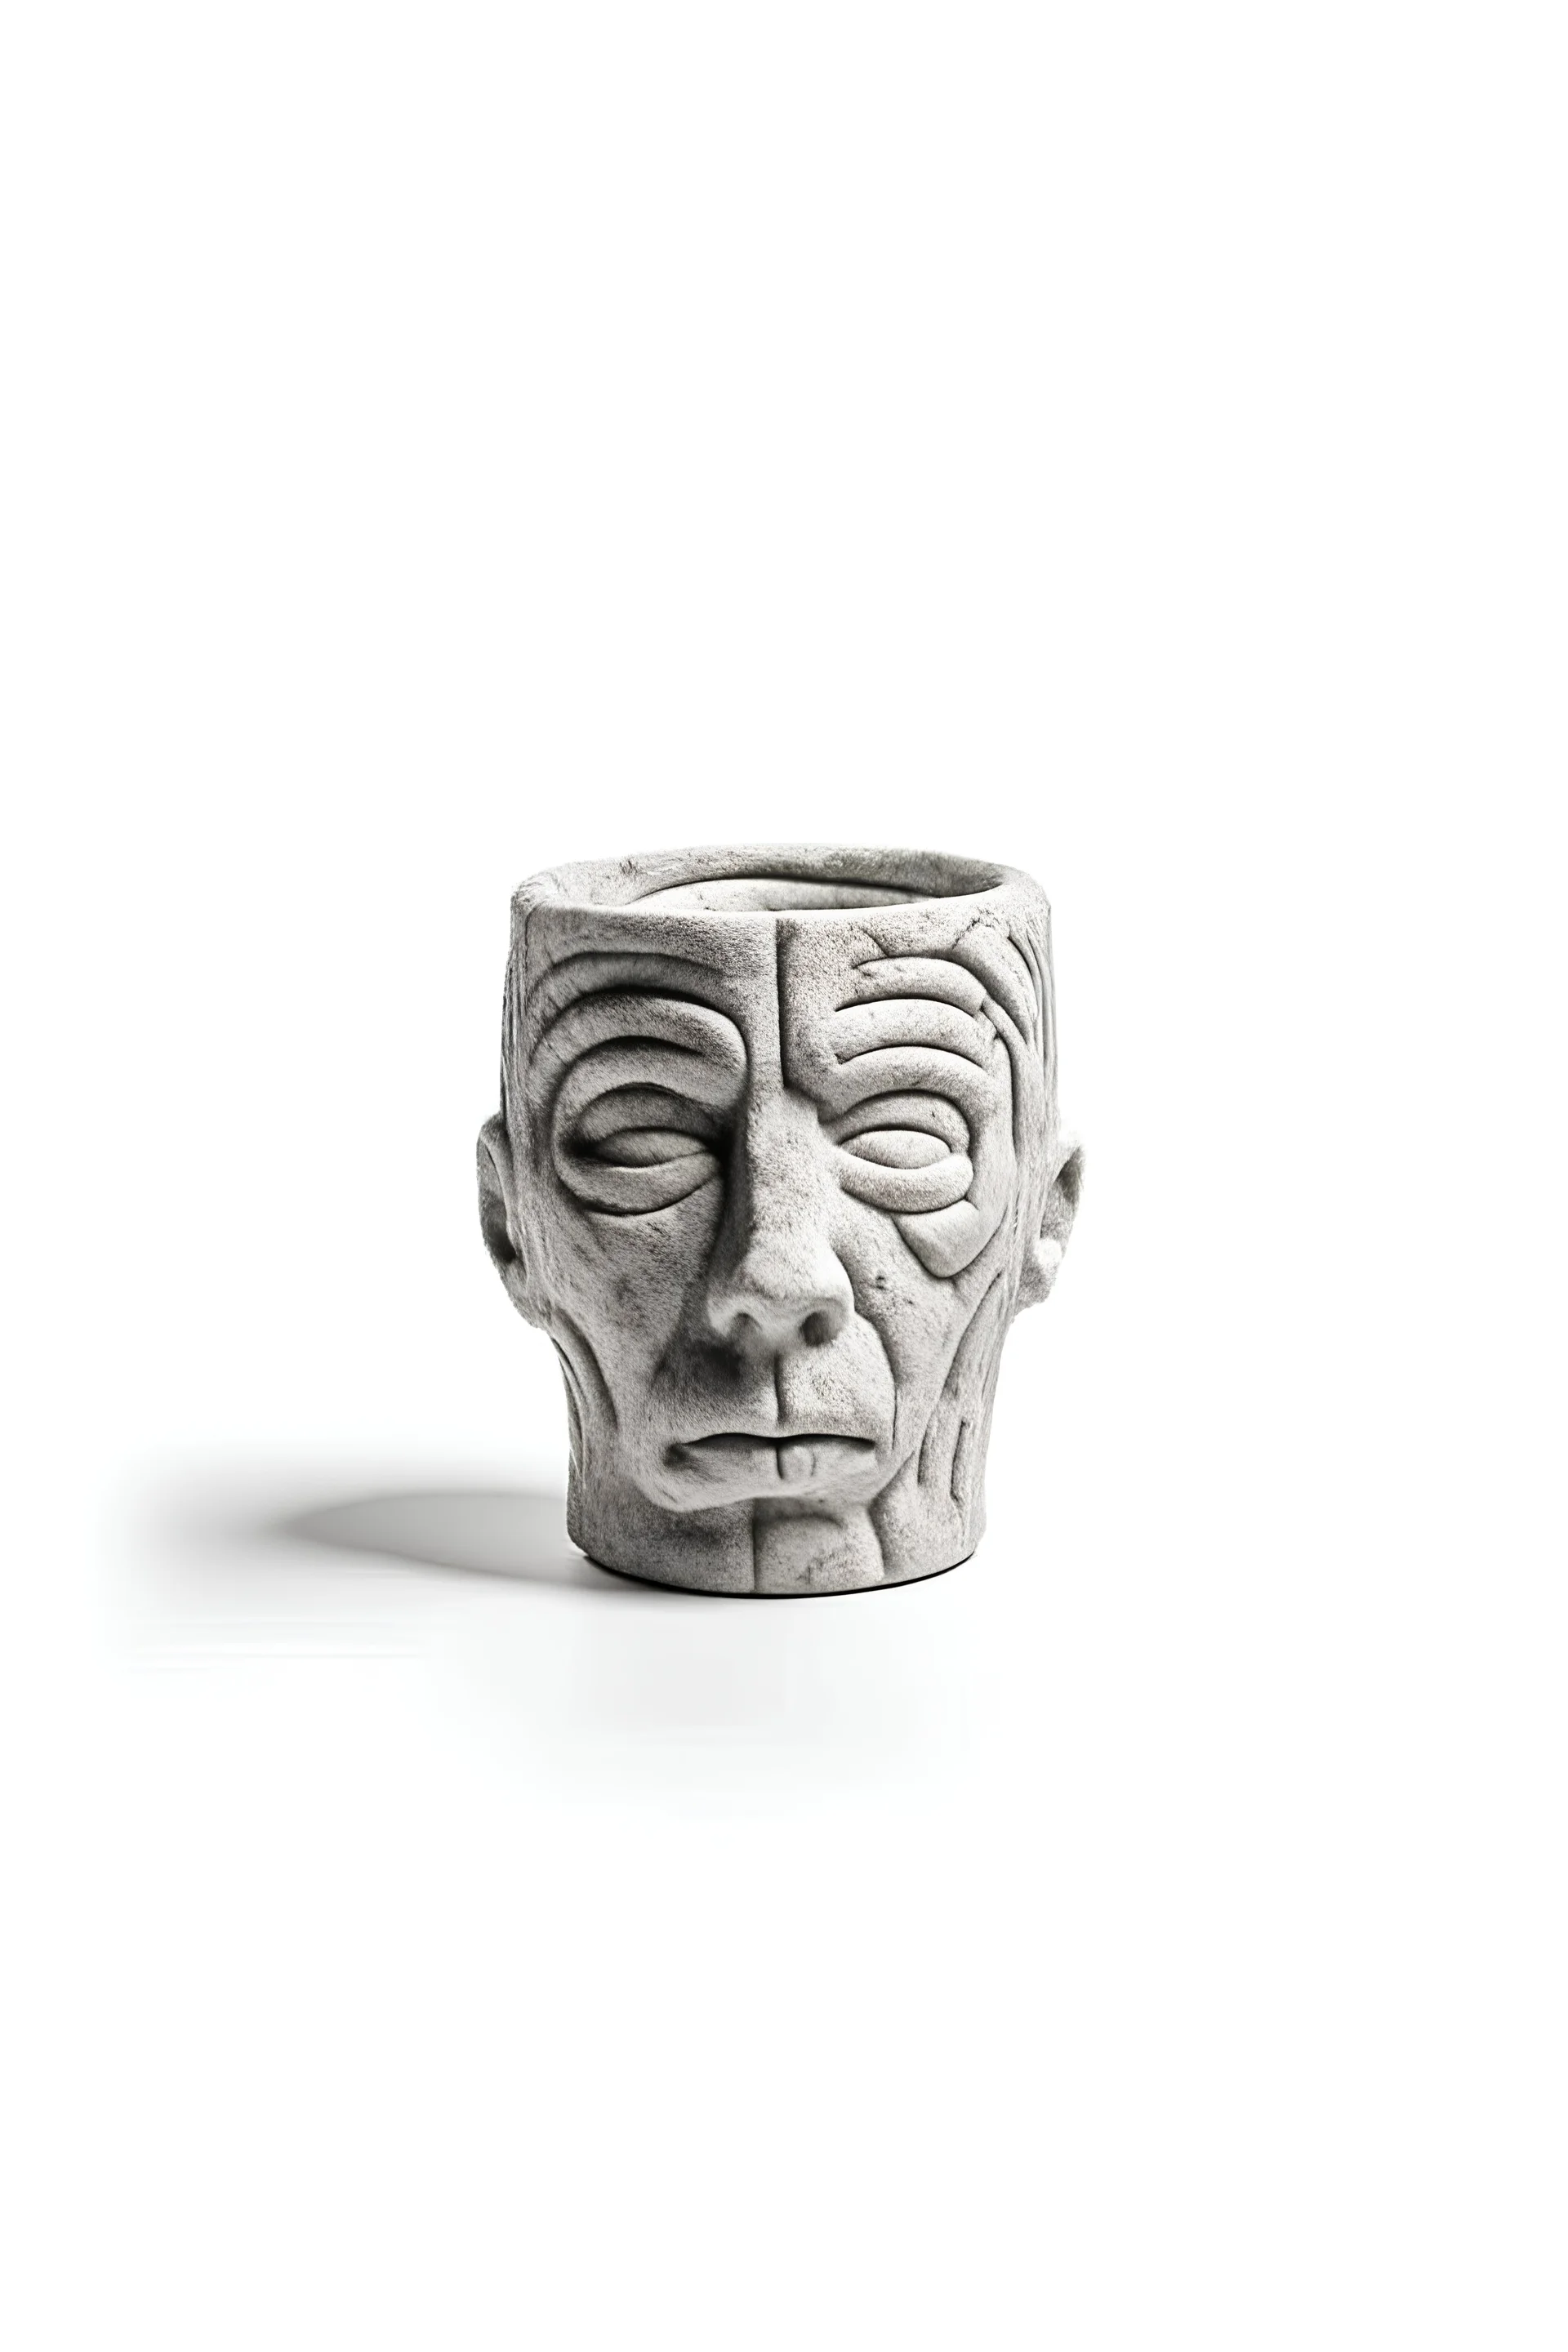 spirits in the shape of a head in concrete with animation on a white background